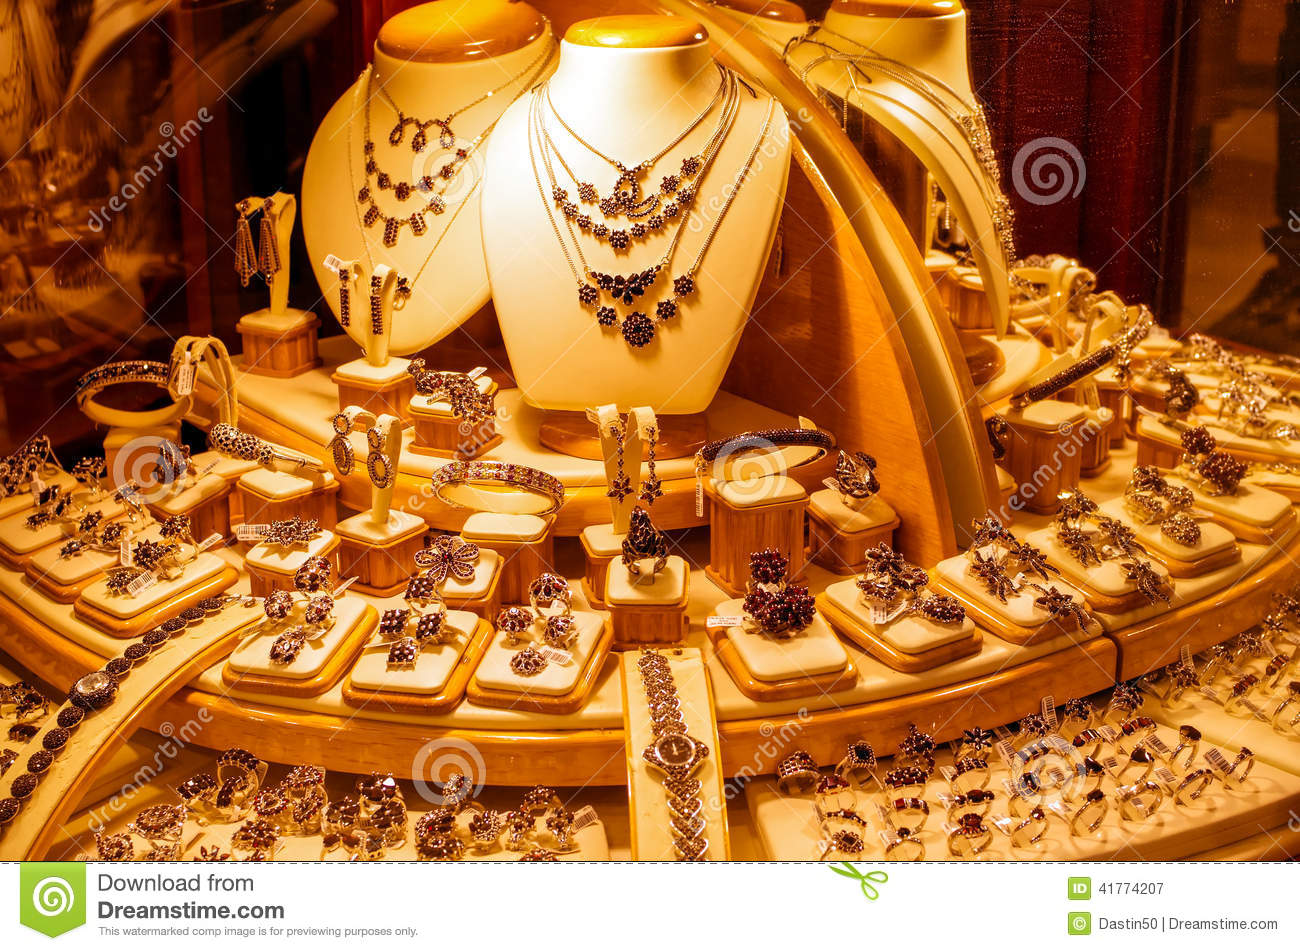 Gold Jewellery In A Shop Window Stock Photo   Image  41774207